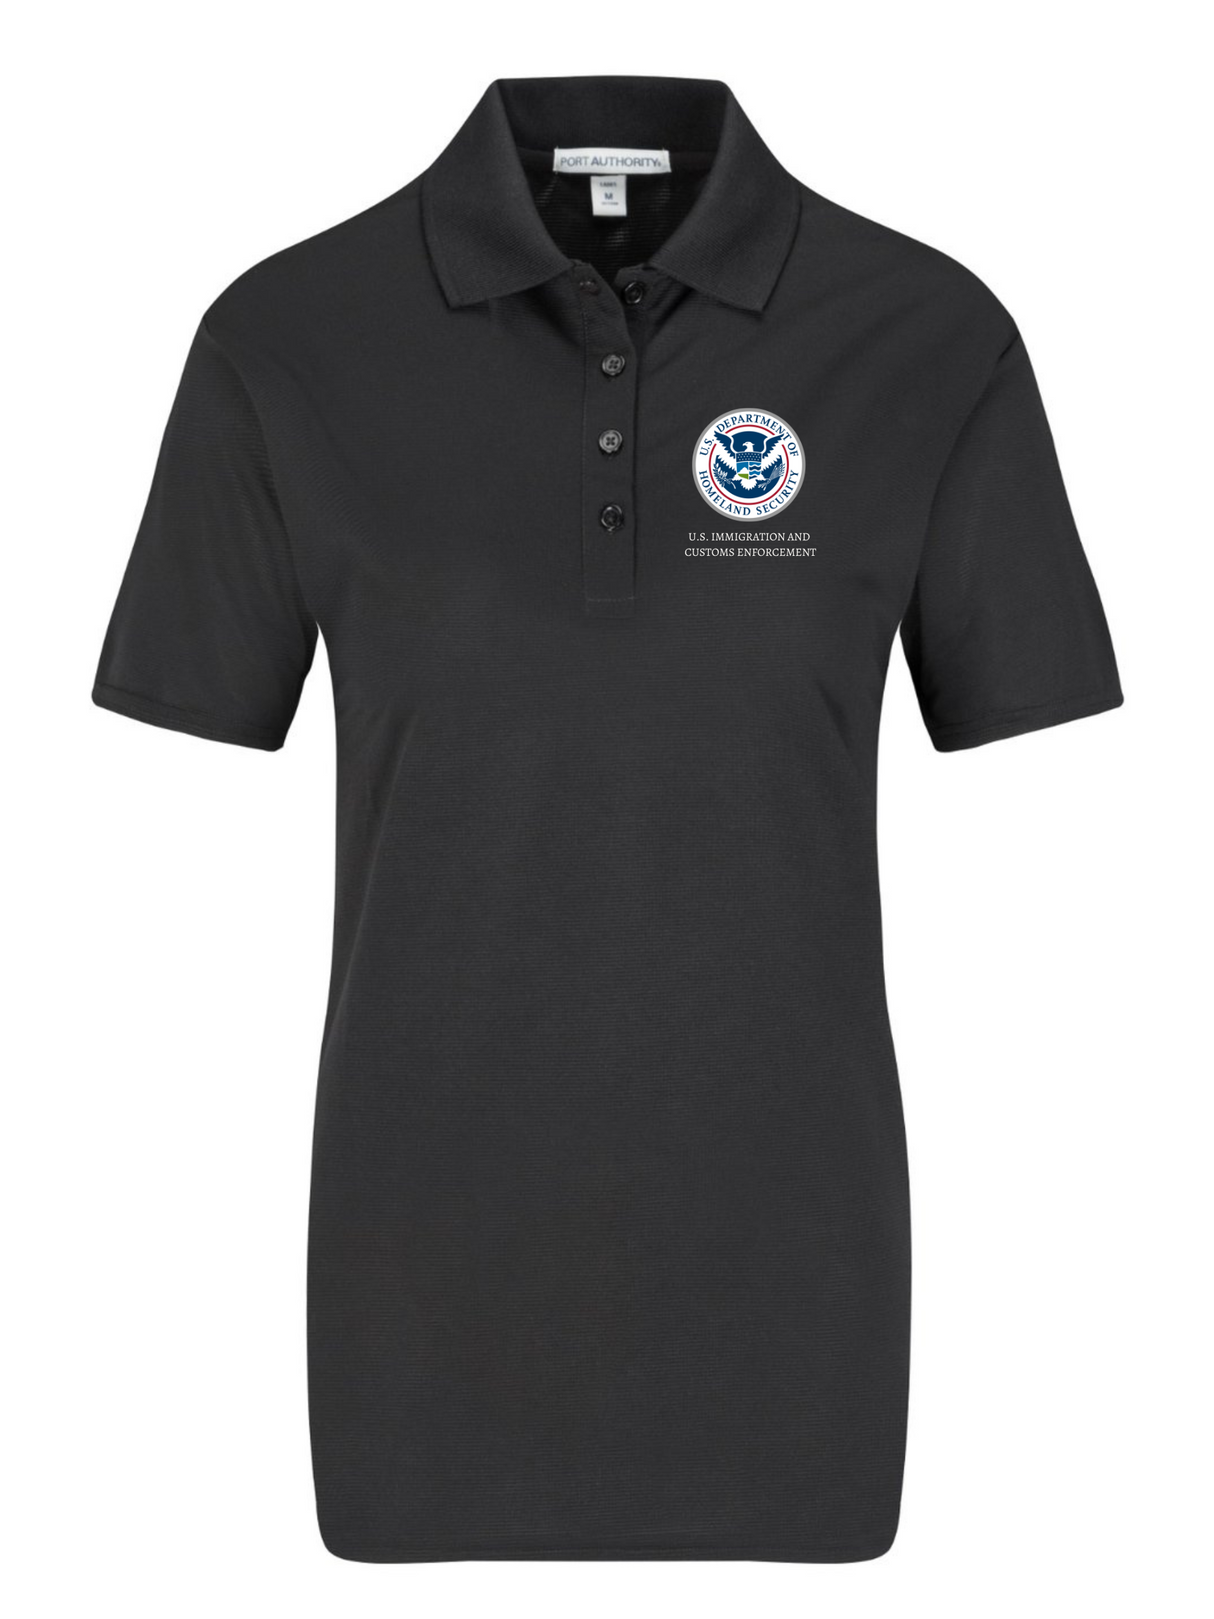 ICE Polo - Women's Short Sleeve - FEDS Apparel